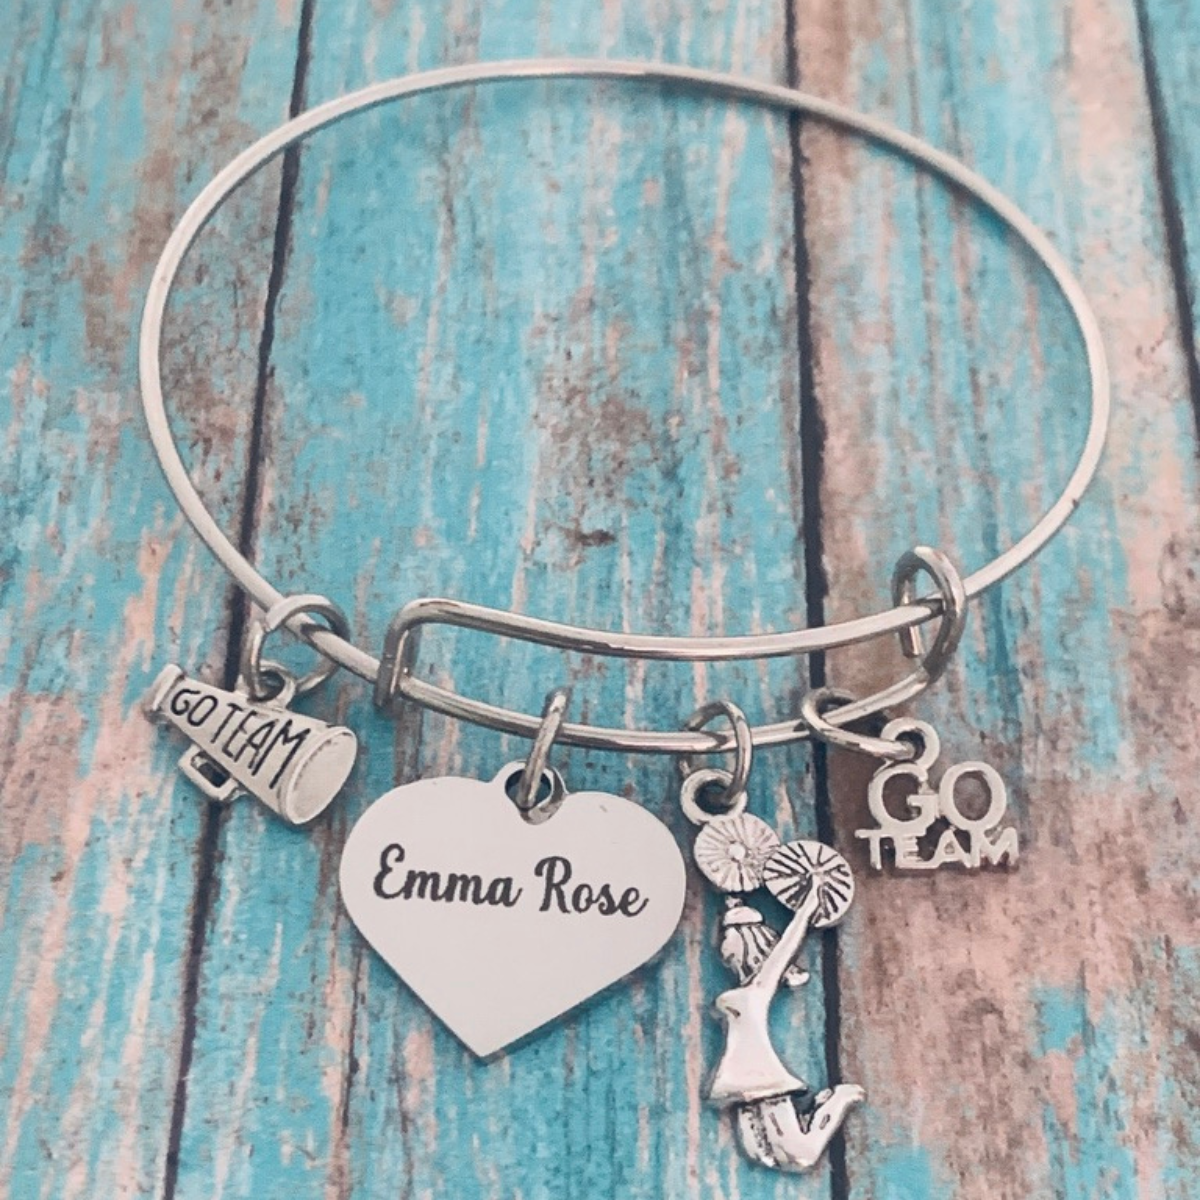 Personalized Cheer Bracelet with Engraved Name Charm